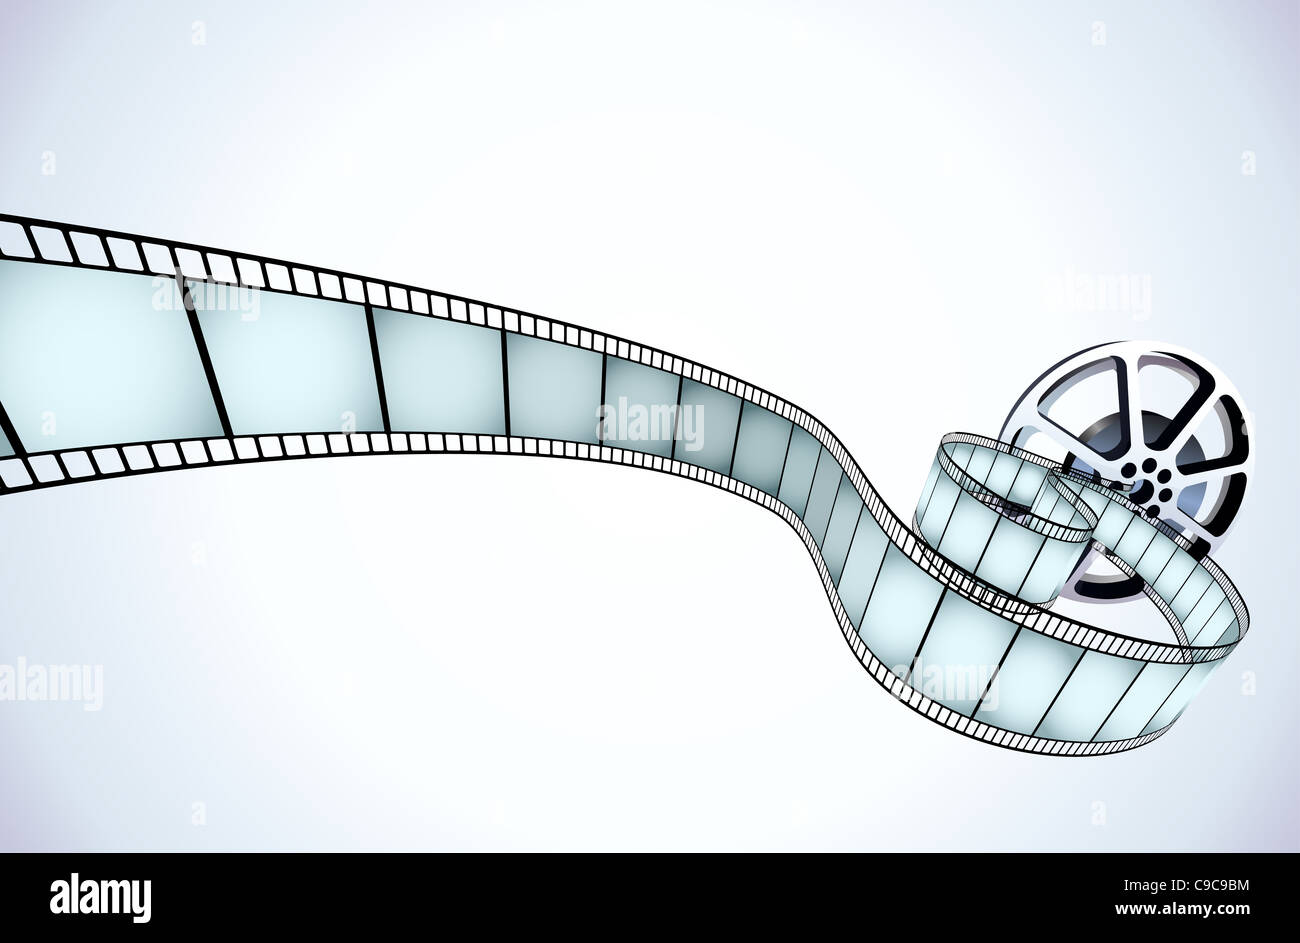 illustrator of movie reel with a strip of exposed frames Stock Photo - Alamy